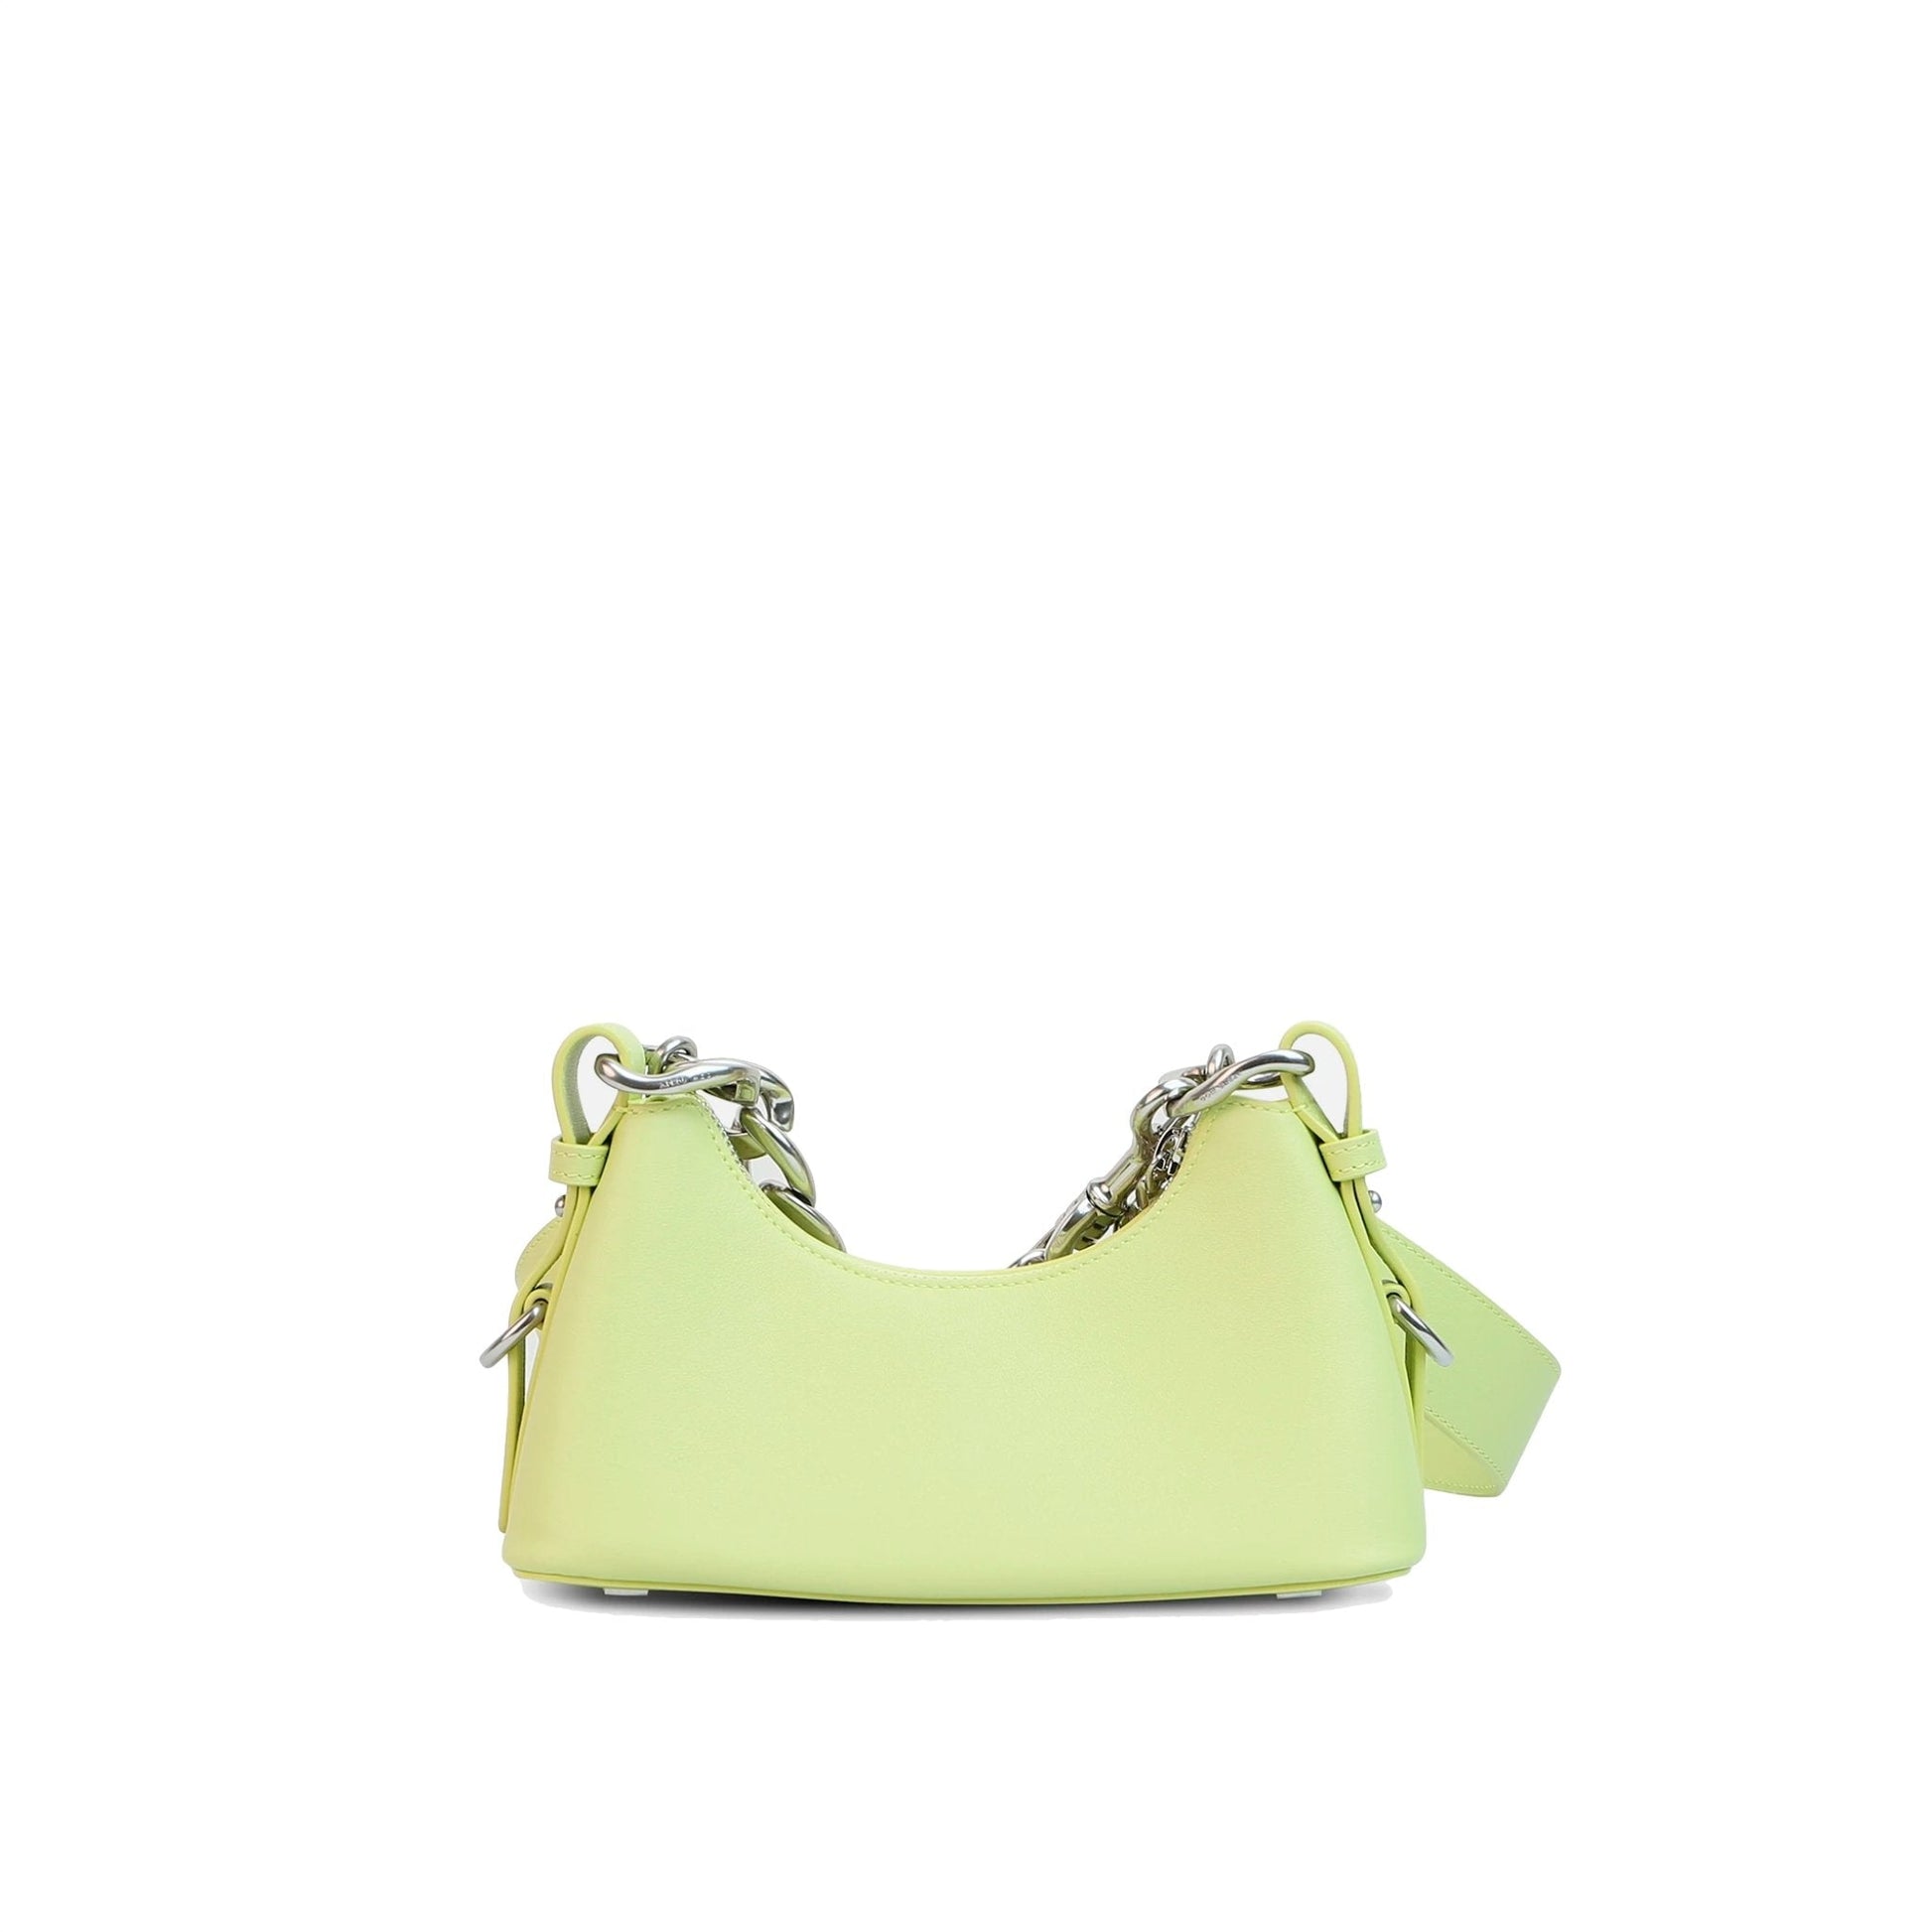 APEDE MOD Lime Green Blossom Mini Lunch Box Pouch | MADA IN CHINA